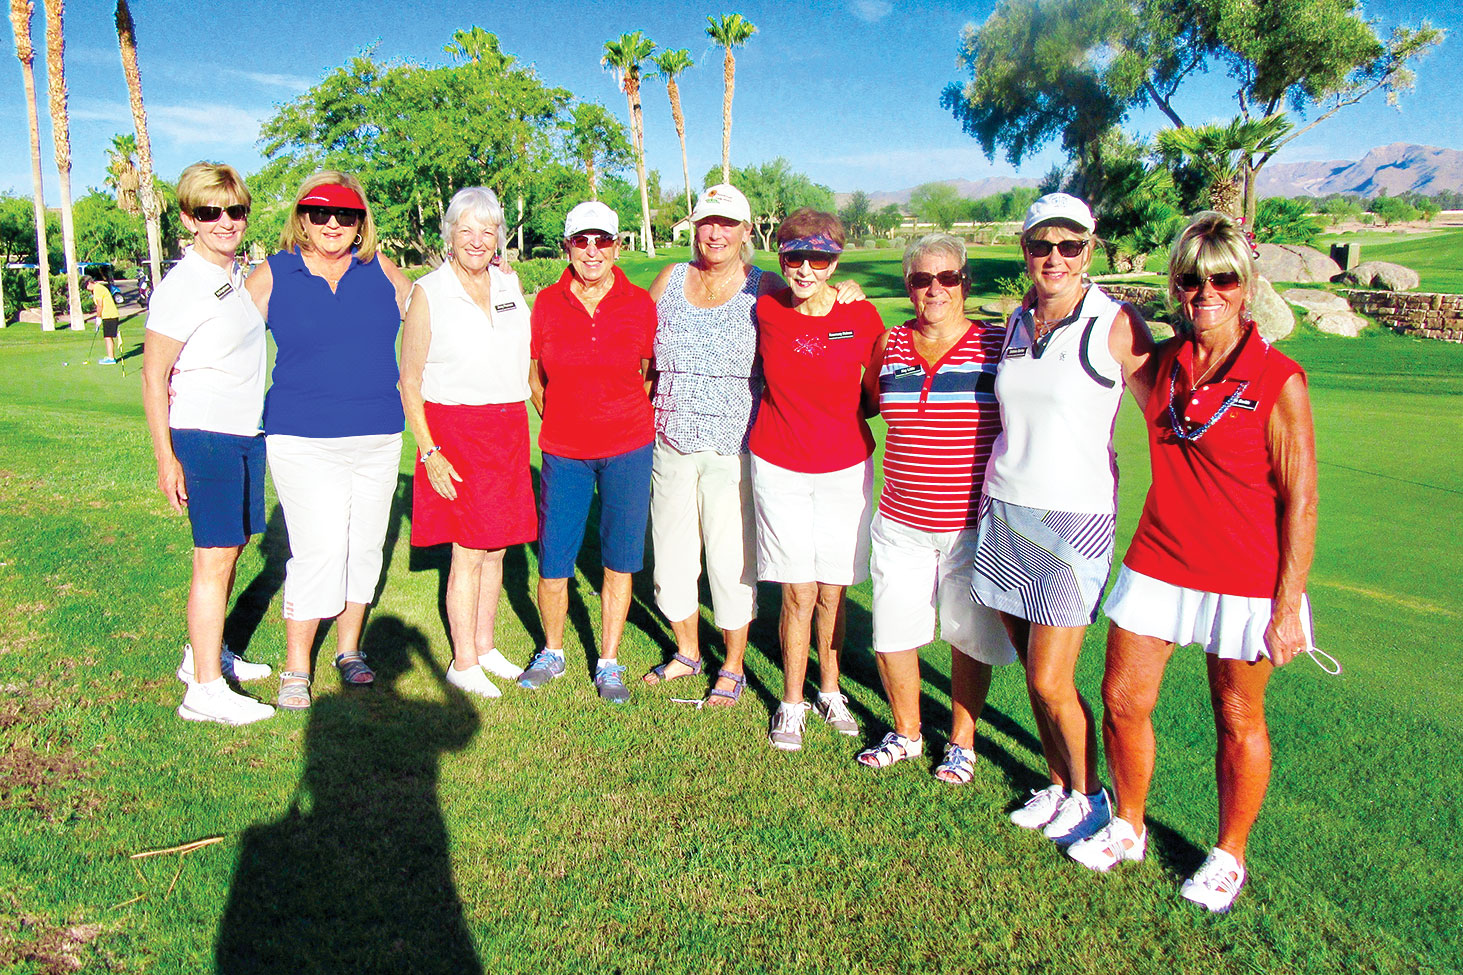 Left to right: Pat Engelmann, Kathy Mitchell, Jinny Pearson, Pat Howard, Lynn Bishop-Pidcock, Rosemary Holmes, Kay Little, Debbie Barbe and Pam Smith